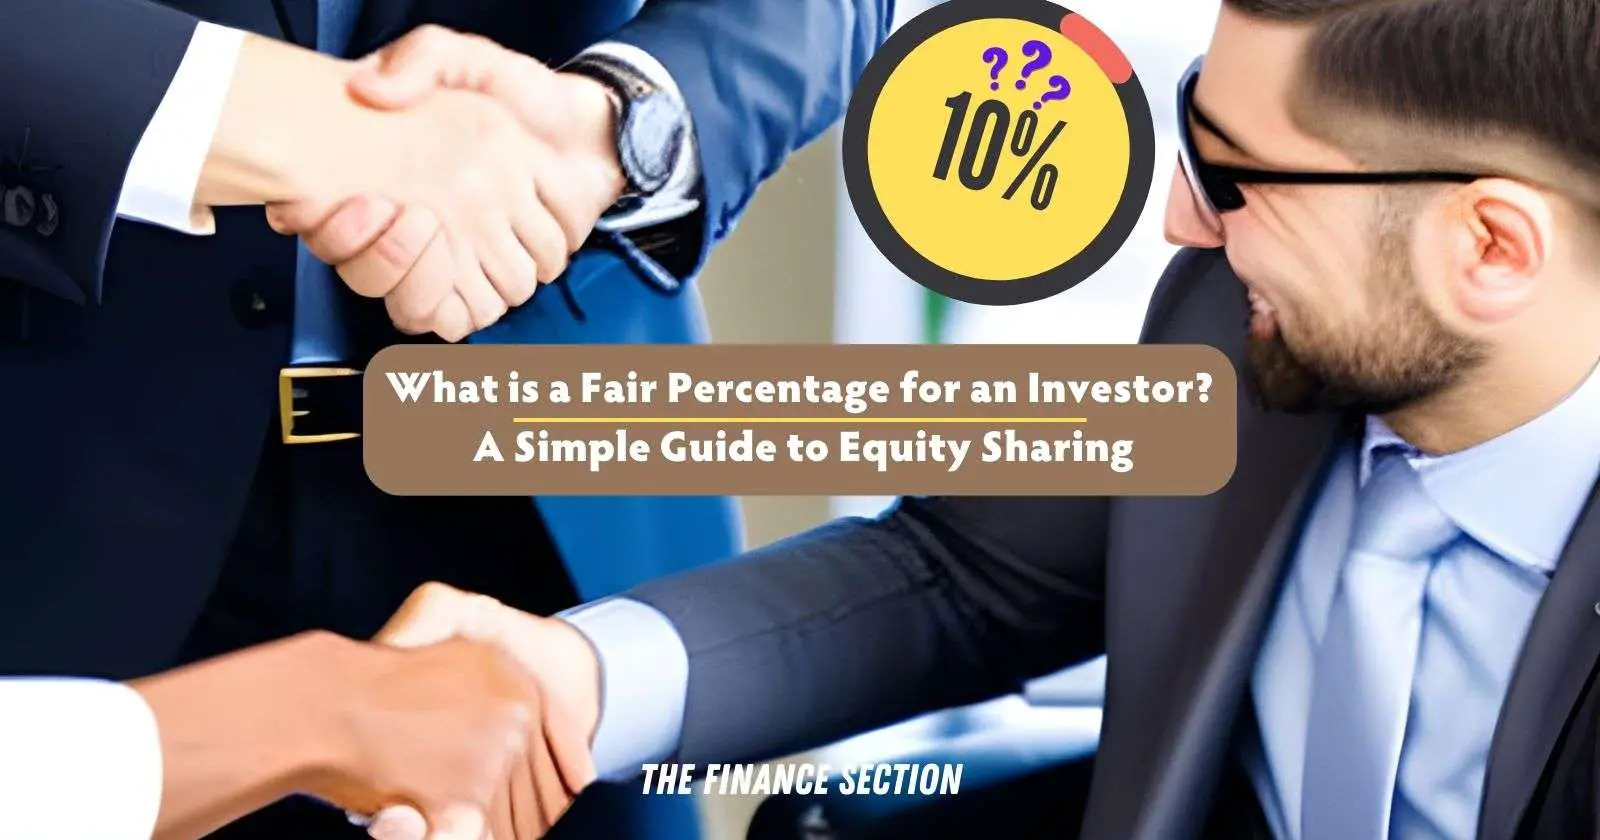 What is a fair percentage for an investor?